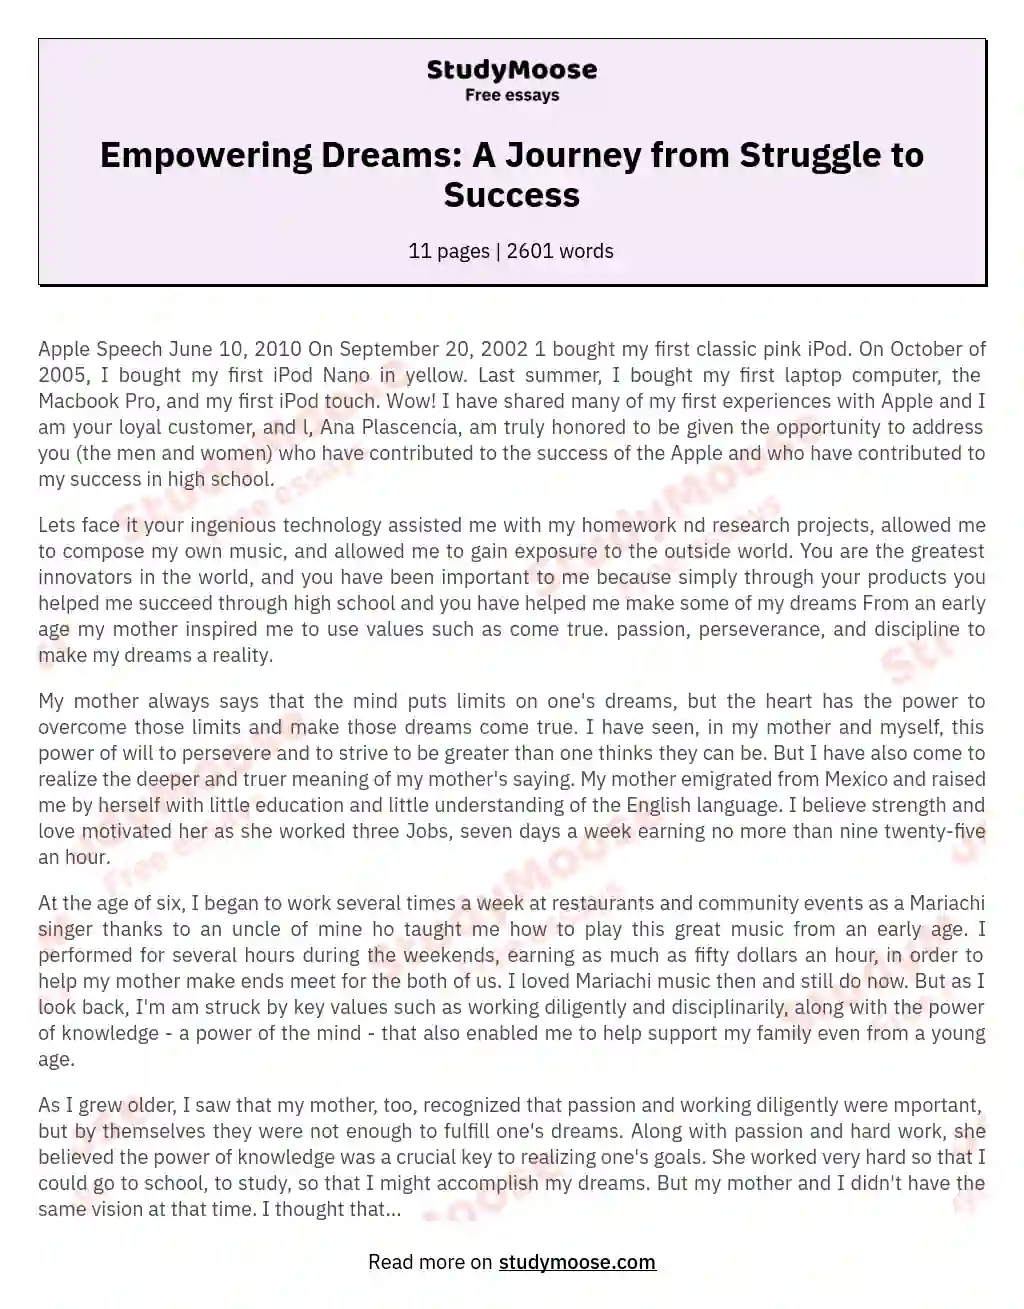 Empowering Dreams: A Journey from Struggle to Success essay